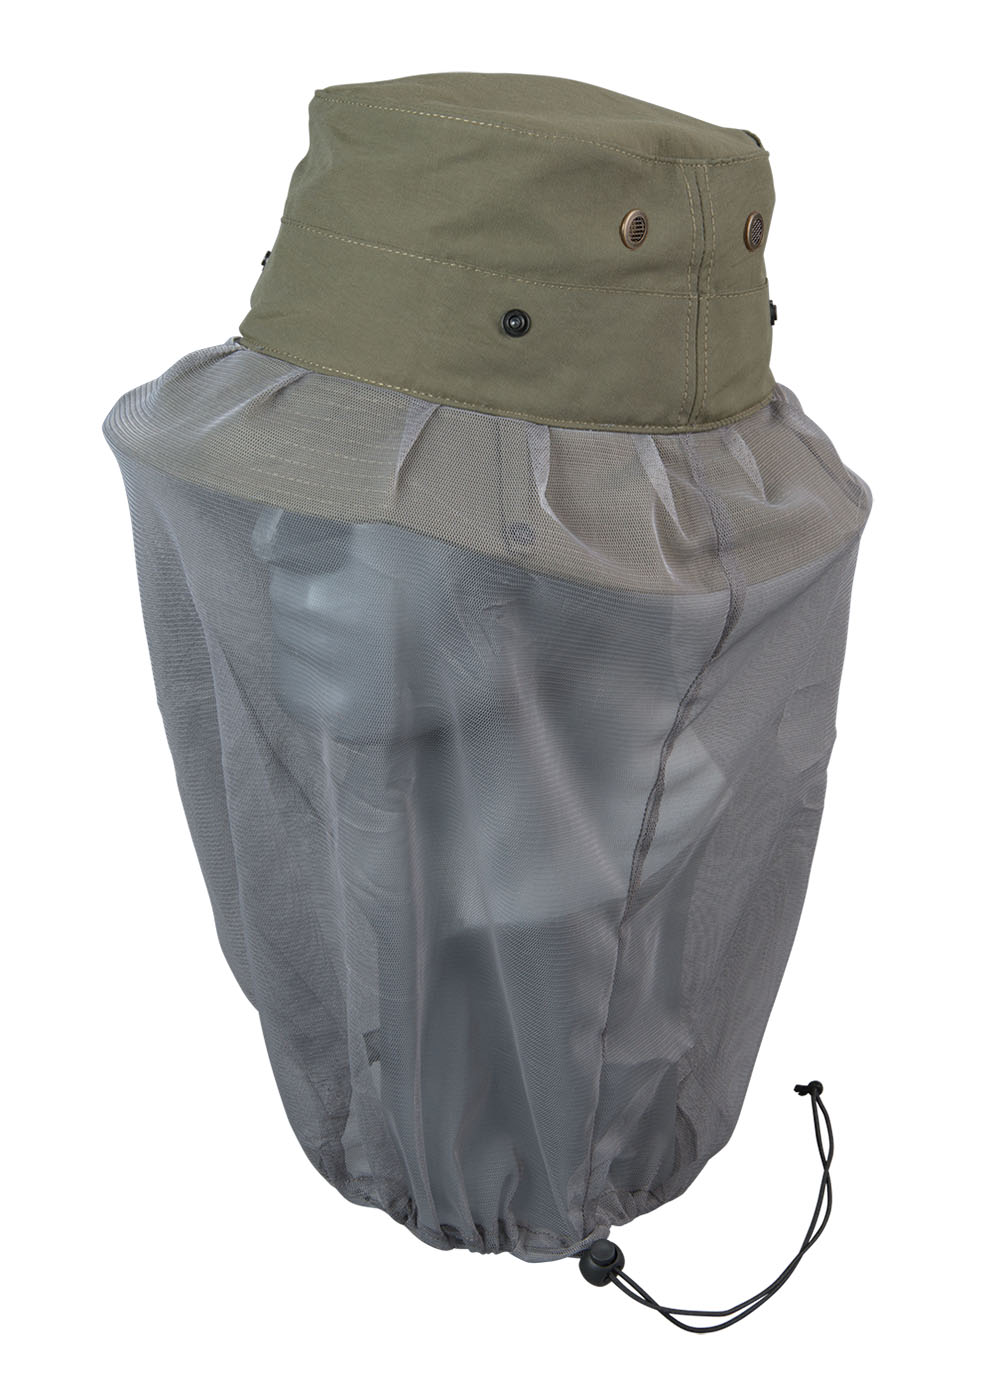 Buzz Off Nylon Bucket Hat with Mesh Netting - Sun Protection